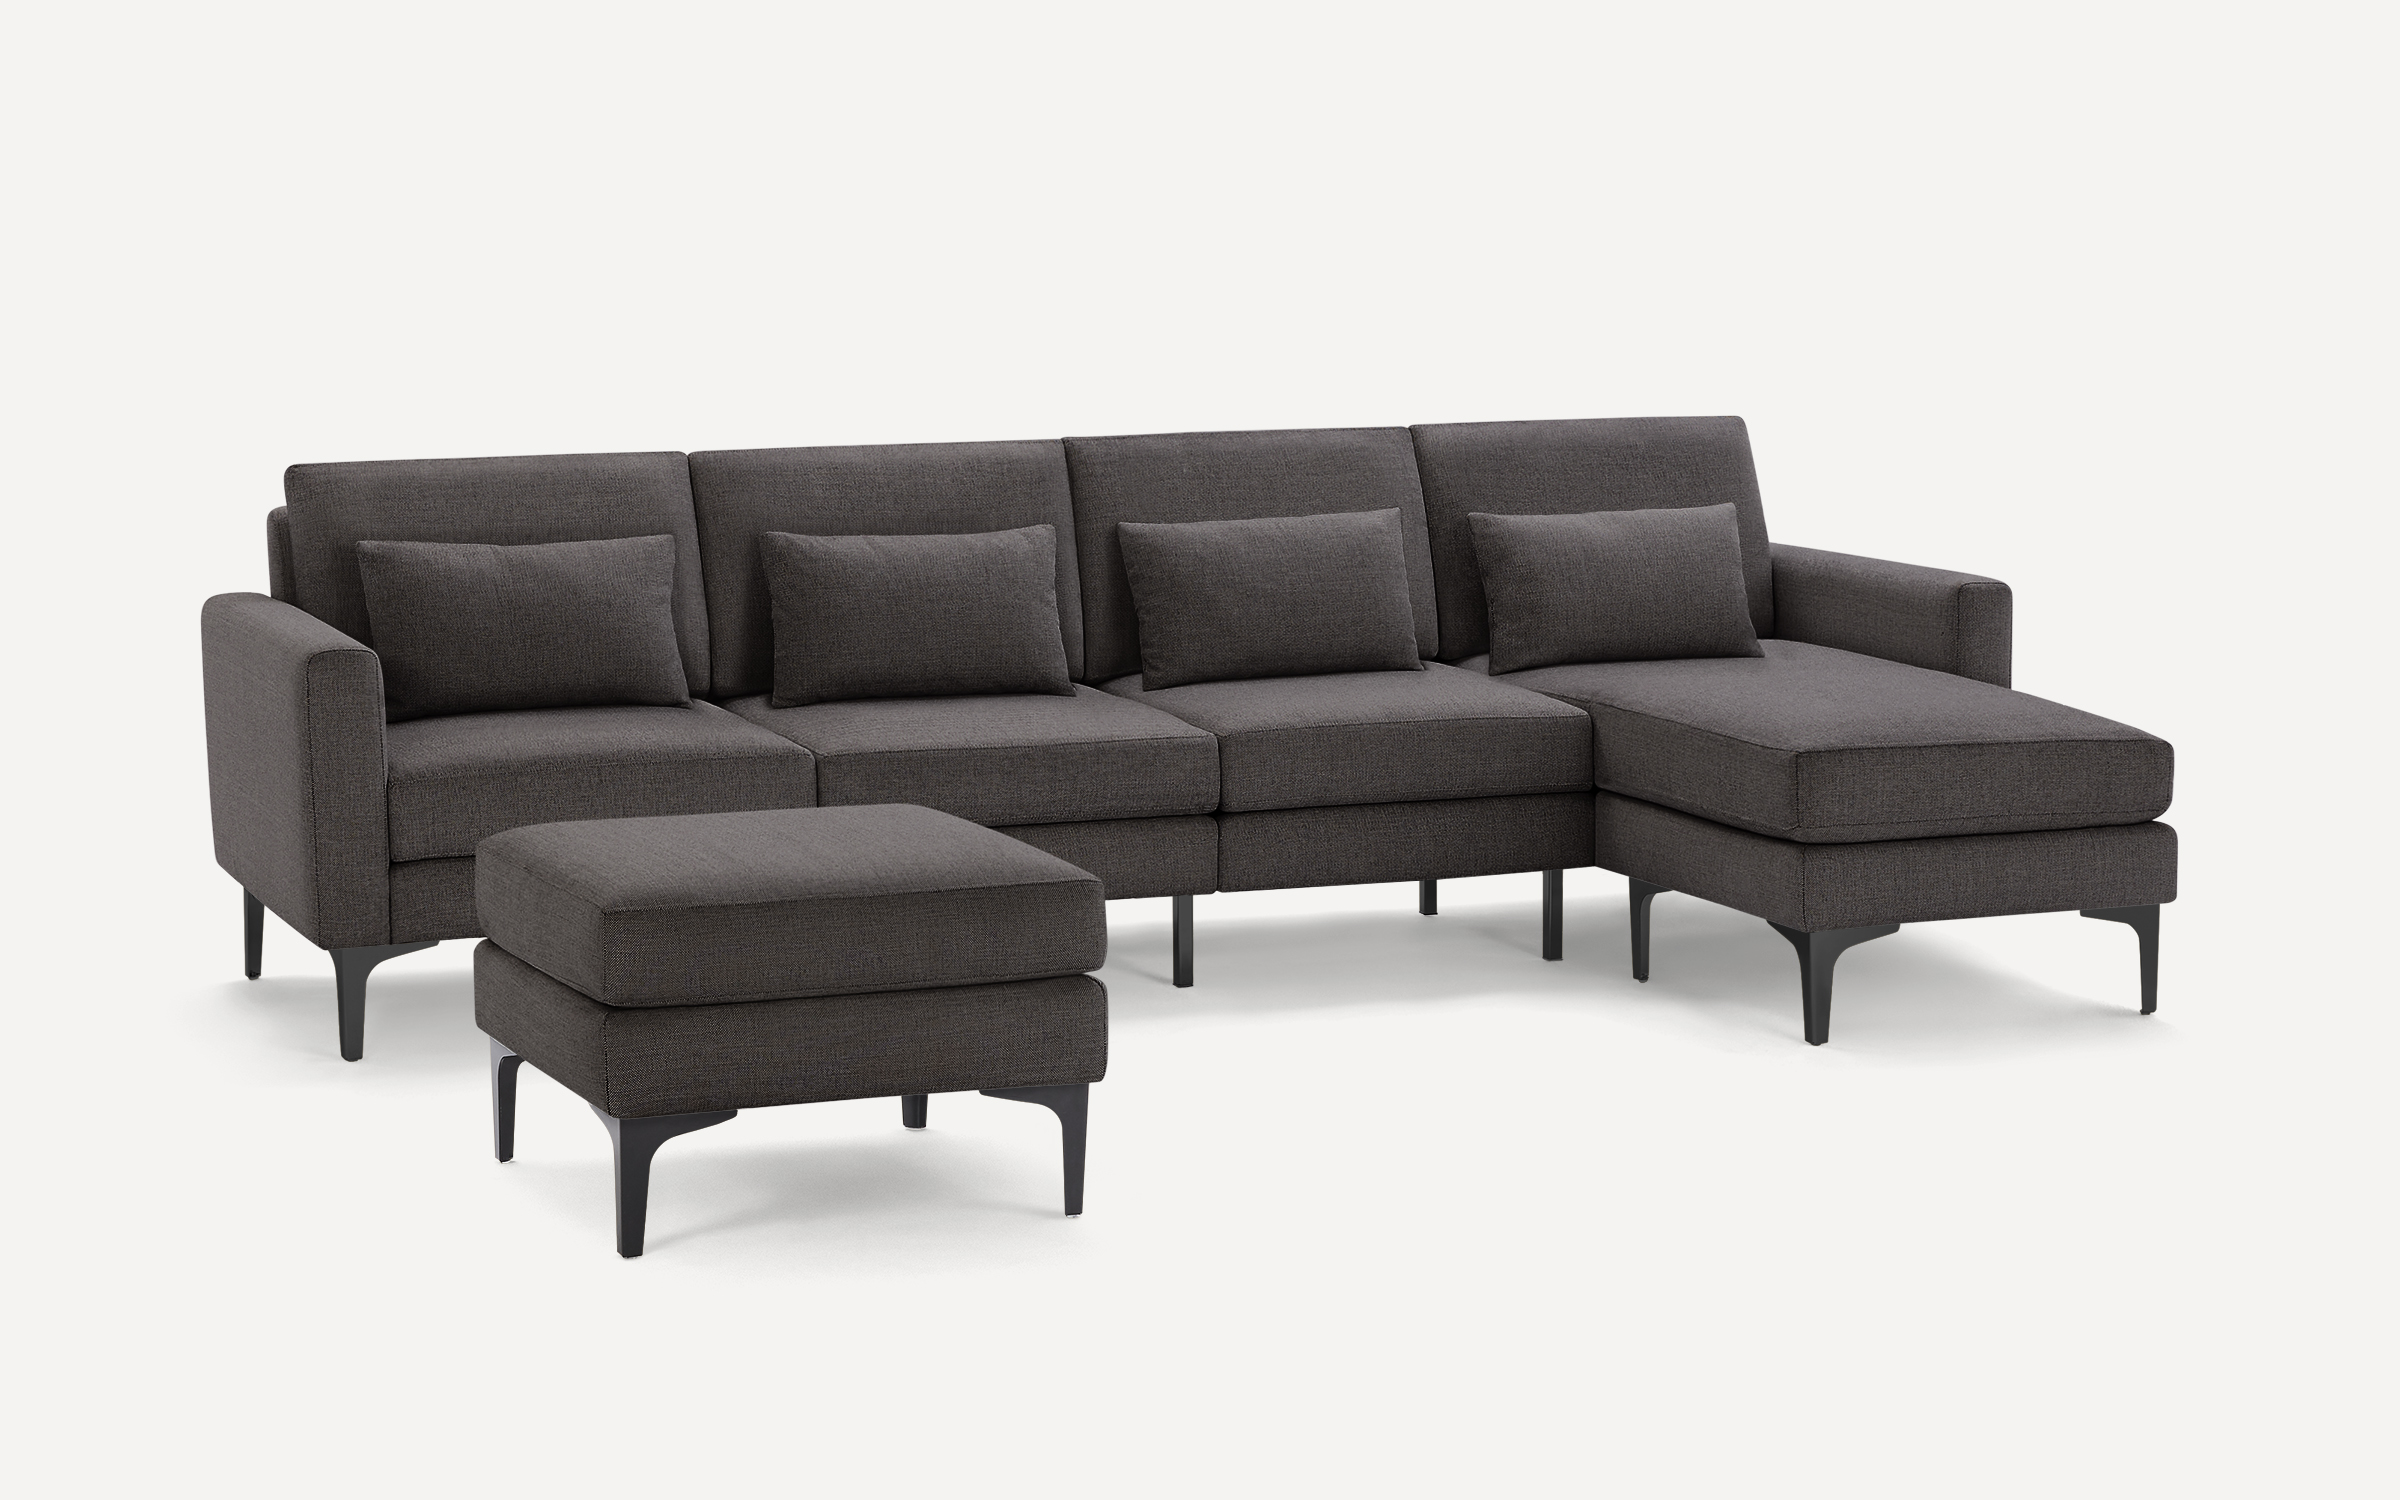 Original Nomad Chaise King Sofa in Charcoal Fabric